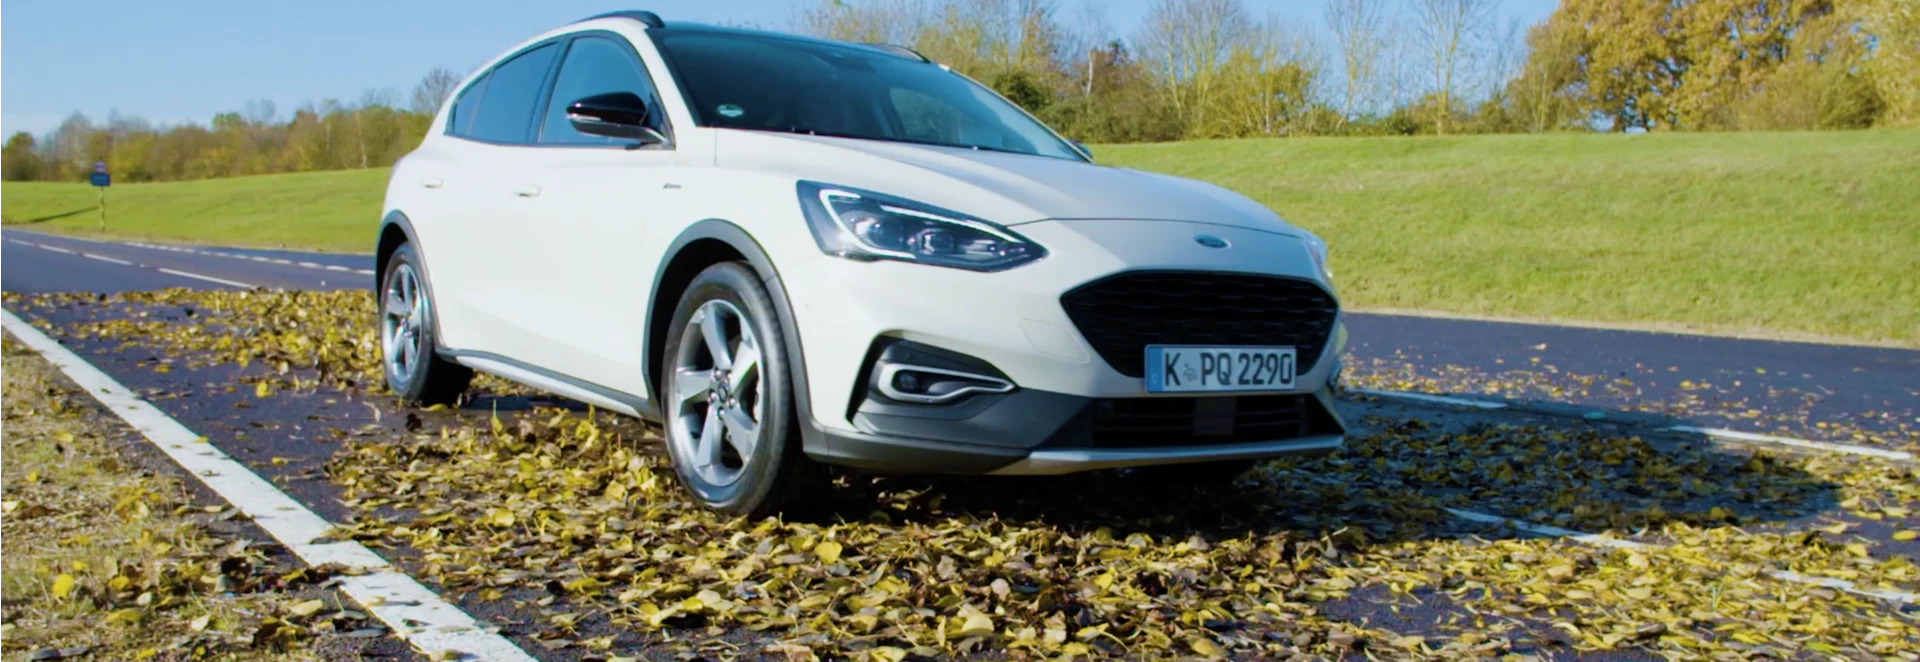 New Ford Focus Active is here, starting at £21,900